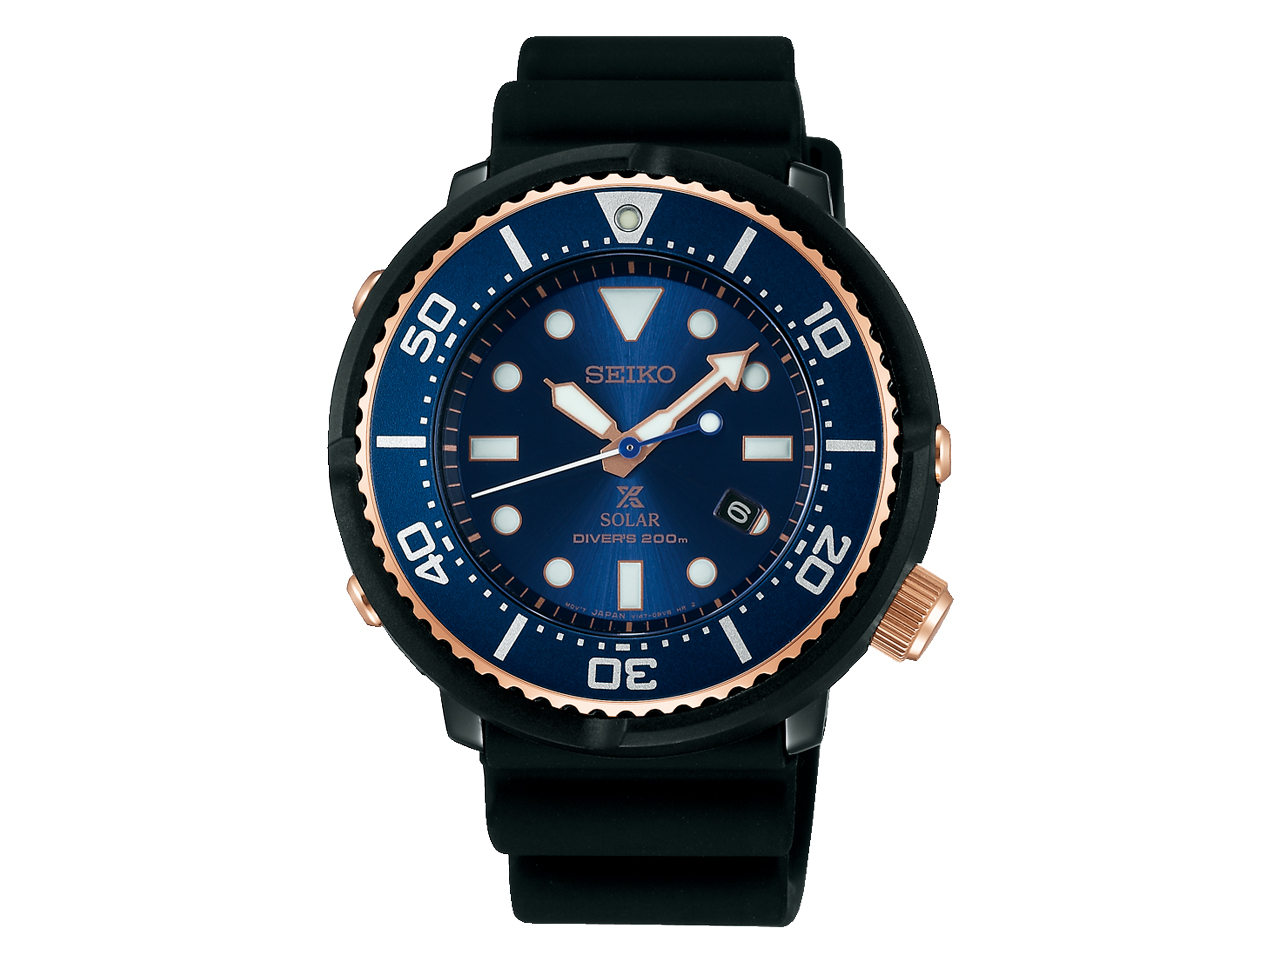 Seiko Prospex Diver Scuba Limited Edition Produced by LOWERCASE